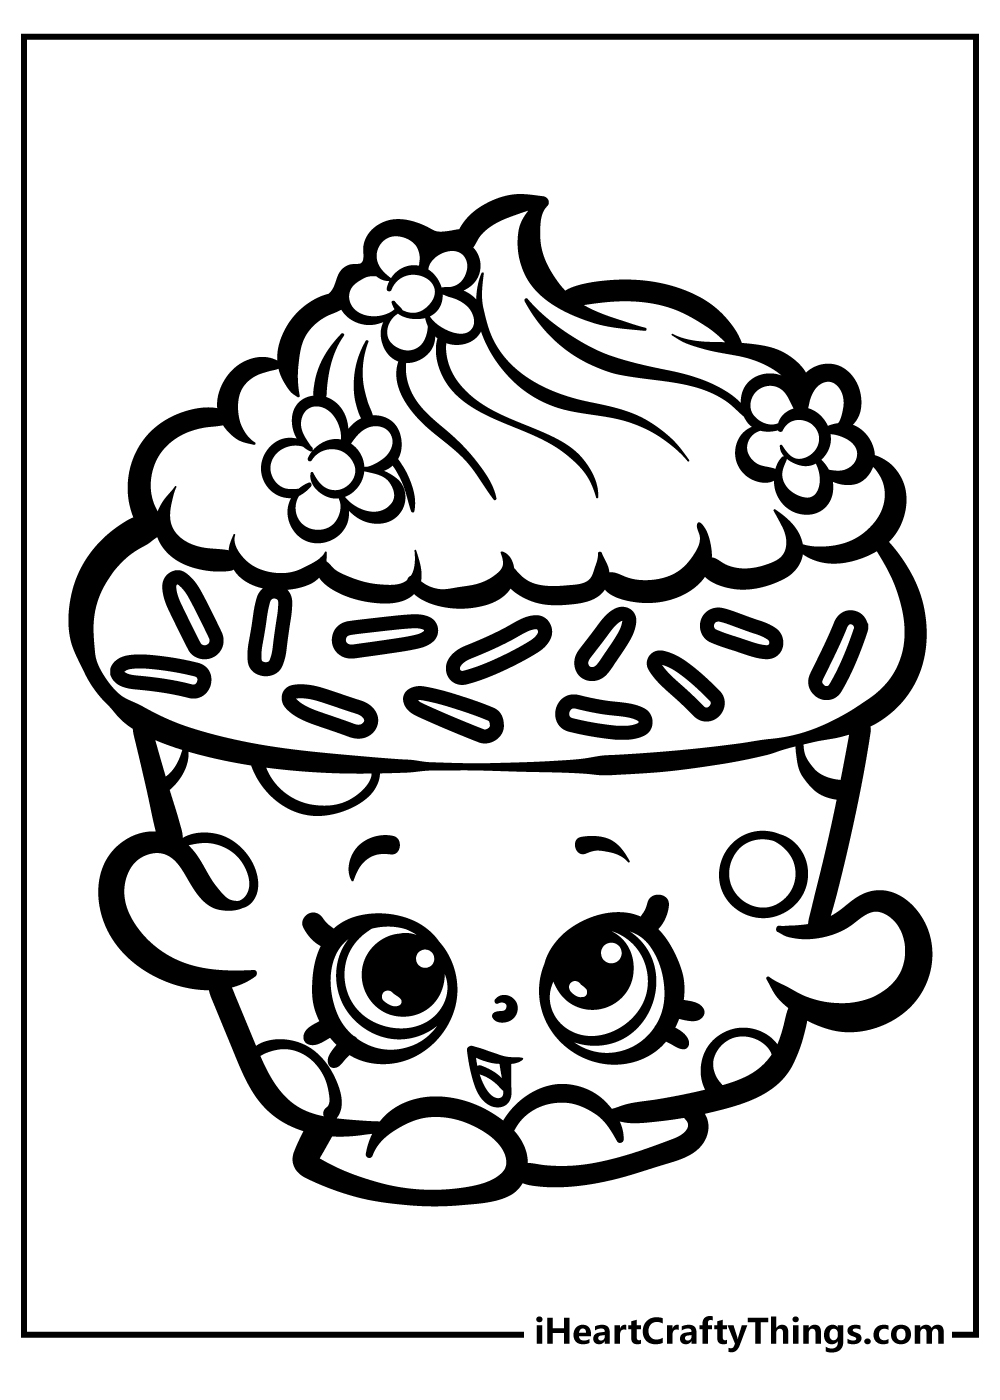 Shopkins coloring pages free printable